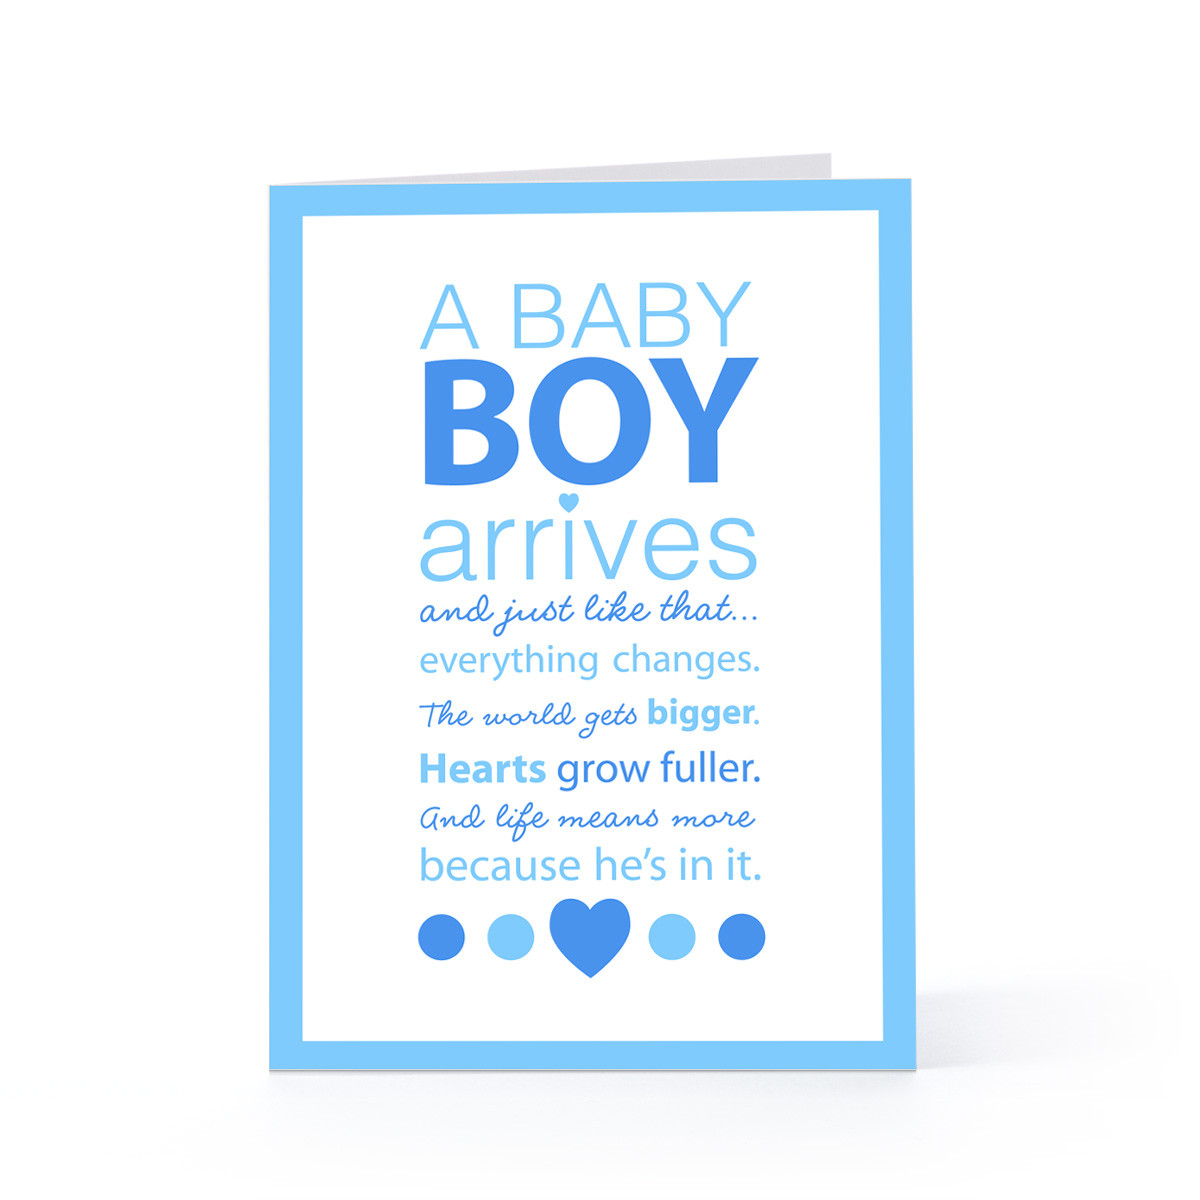 Quotes About Having A Baby Boy
 Wel e Quotes For Baby Boy Newborn QuotesGram